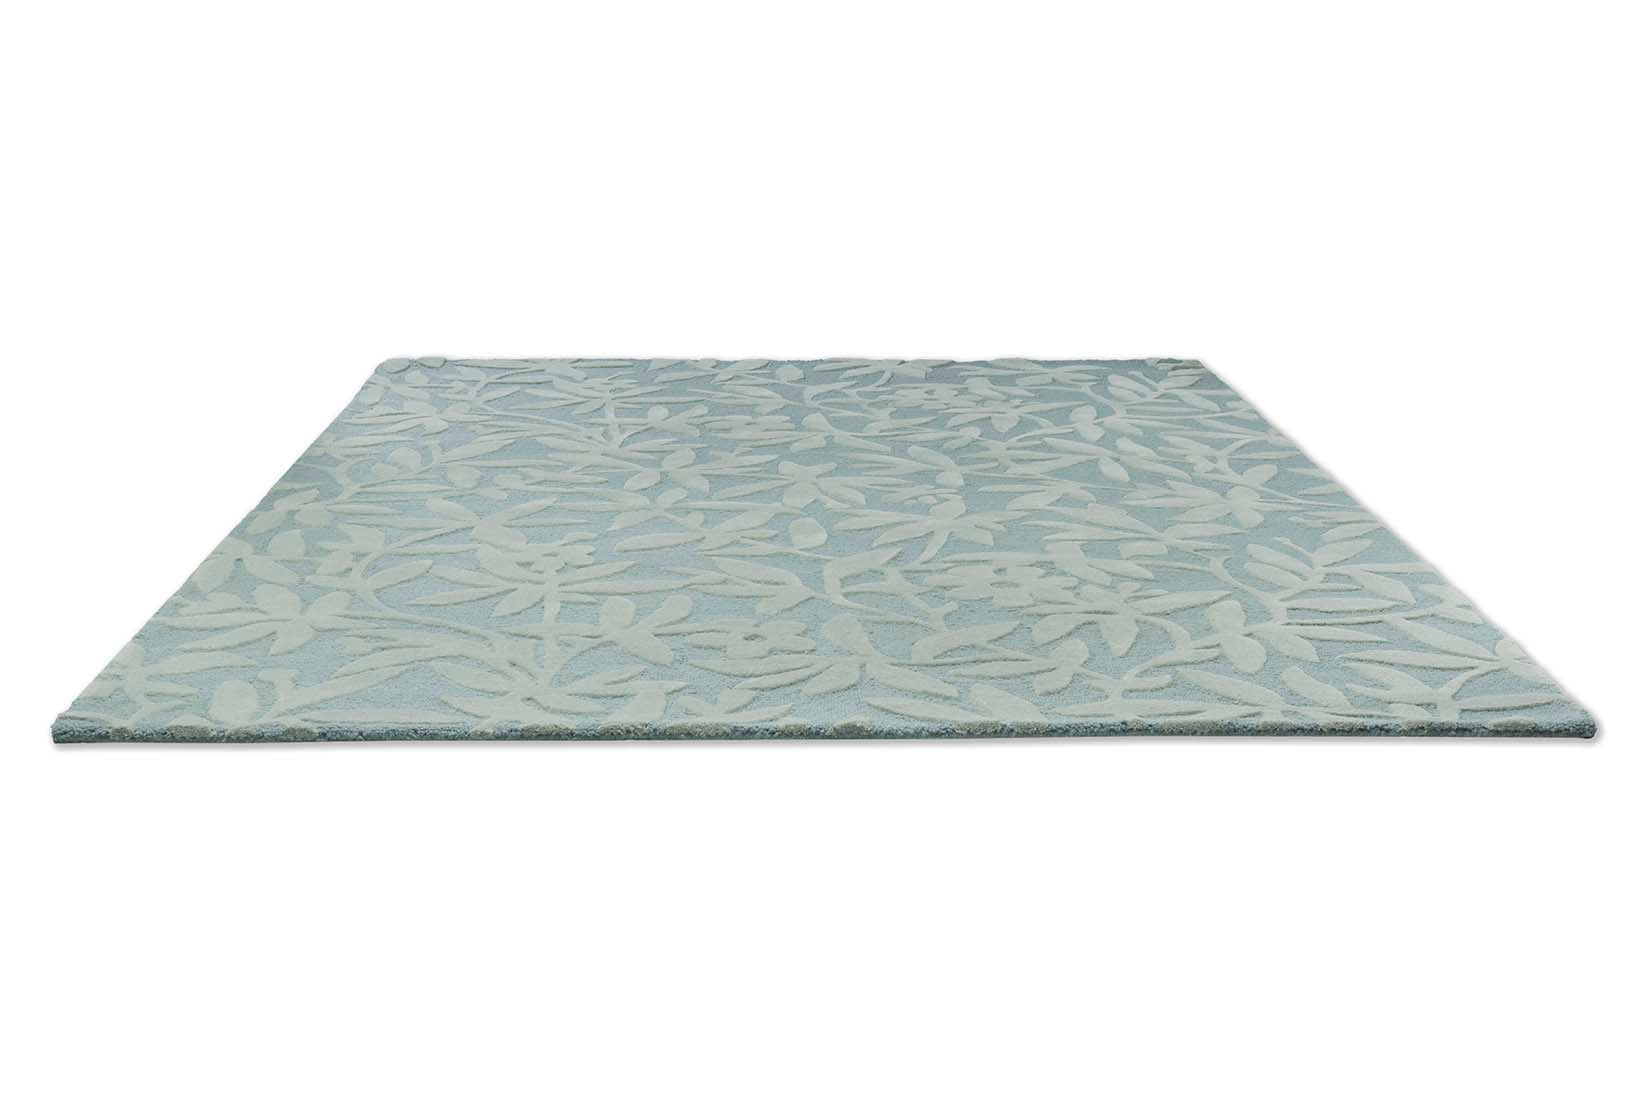 Green and blue wool rug with hand carved floral motifs
